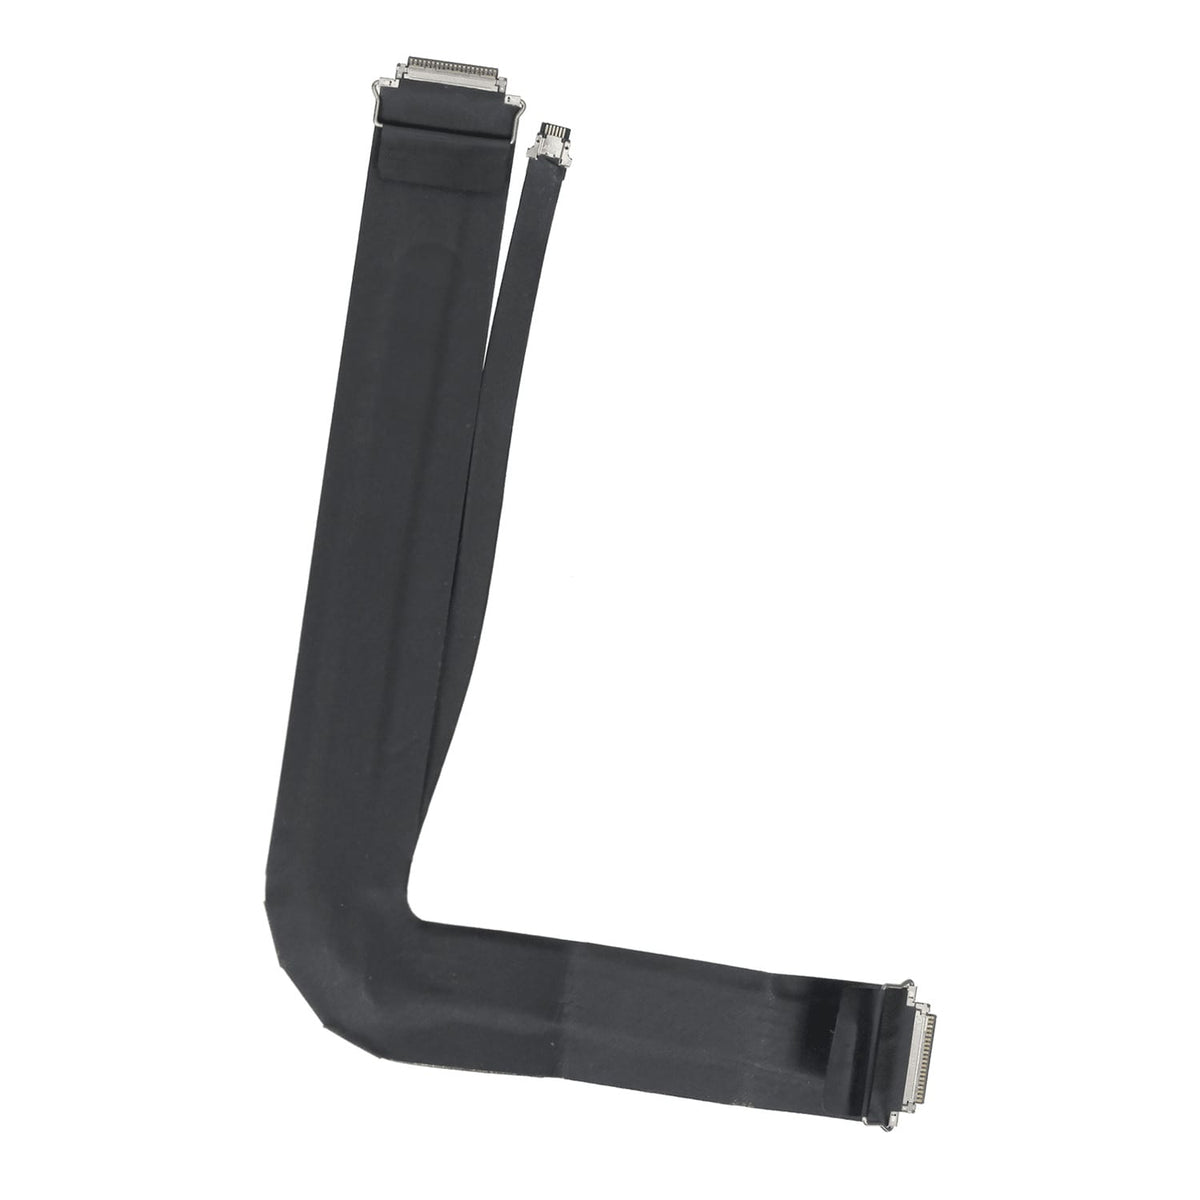 ISIGHT CAMERA & MICROPHONE CABLE FOR IMAC 21.5" A1418 (LATE 2015)